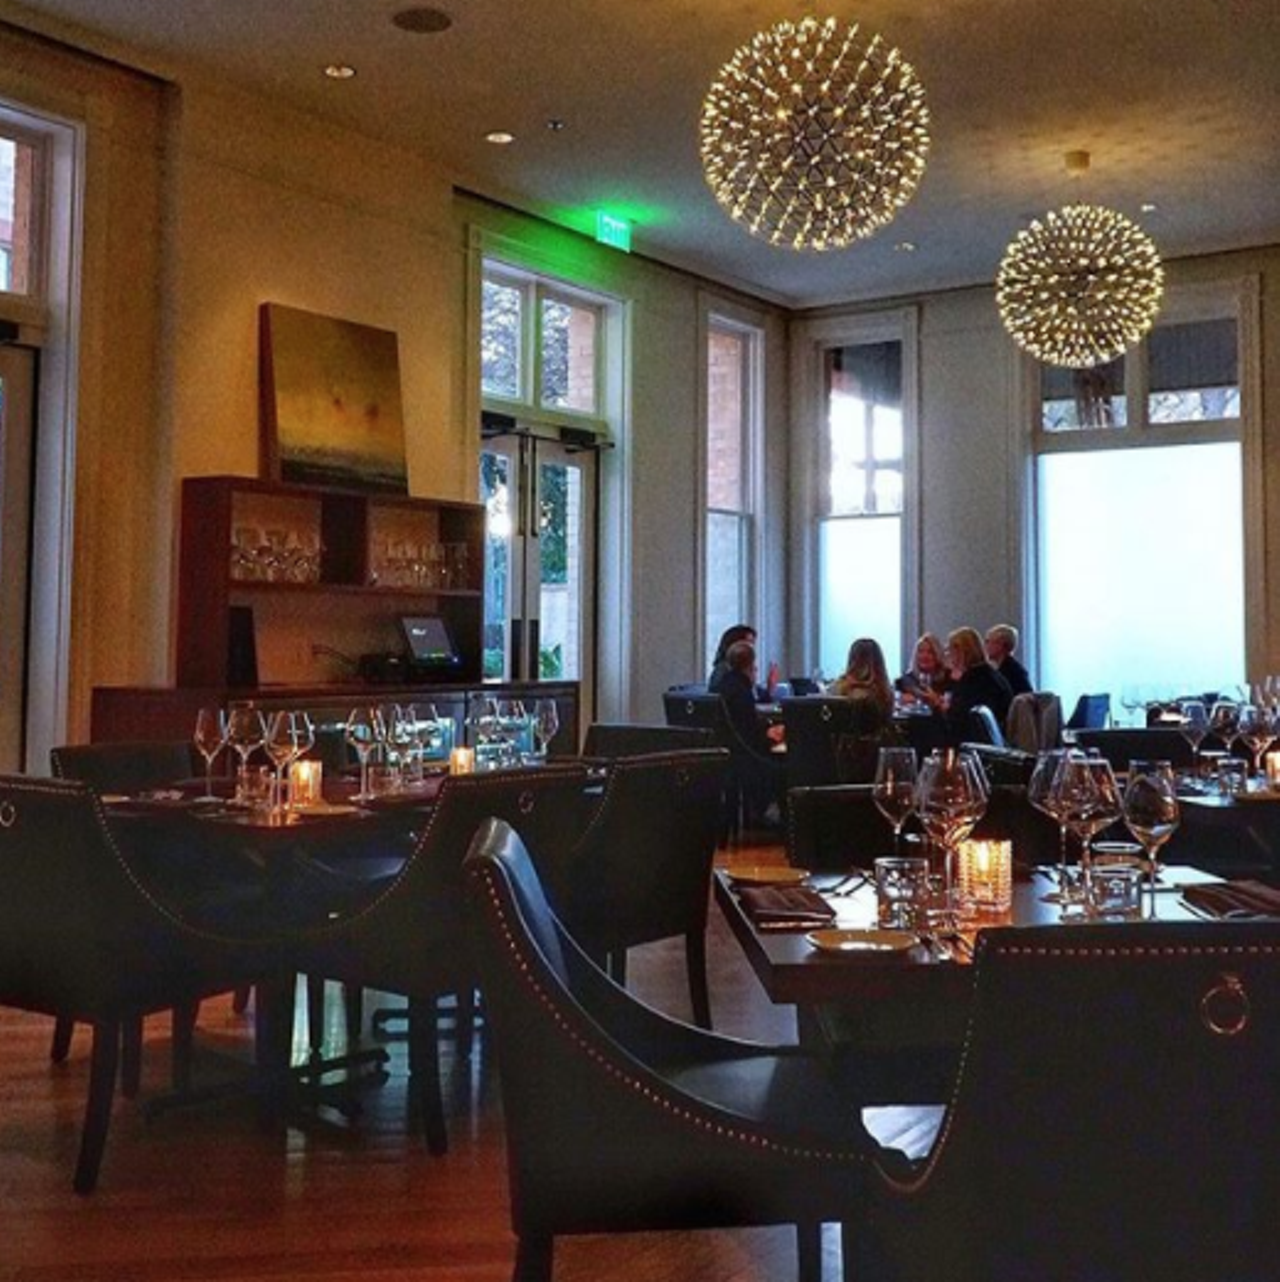 12. Silo Prime
1133 Austin Hwy., (210) 824-8686, siloelevatedcuisine.com
“The wait staff will spoil you and the menu will tantalize your taste buds. 5 star restaurant experience from the atmosphere to the food. Amazing.” - Frederic C.
Photo via Instagram / miss_eater_tx